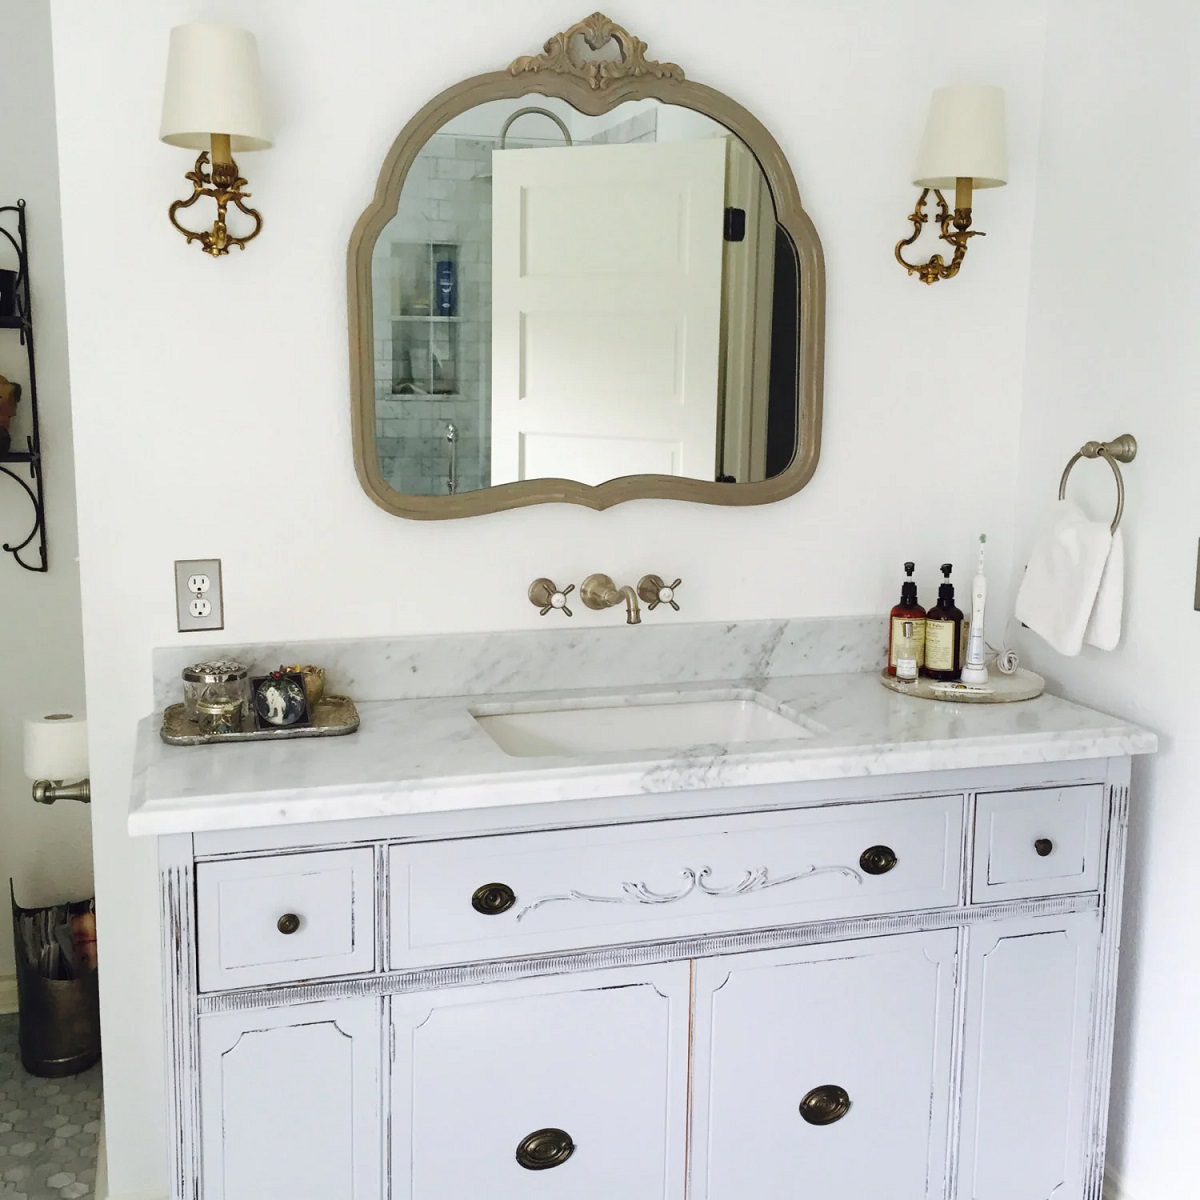 How To Turn Single Sink Vanity Into Double Sink